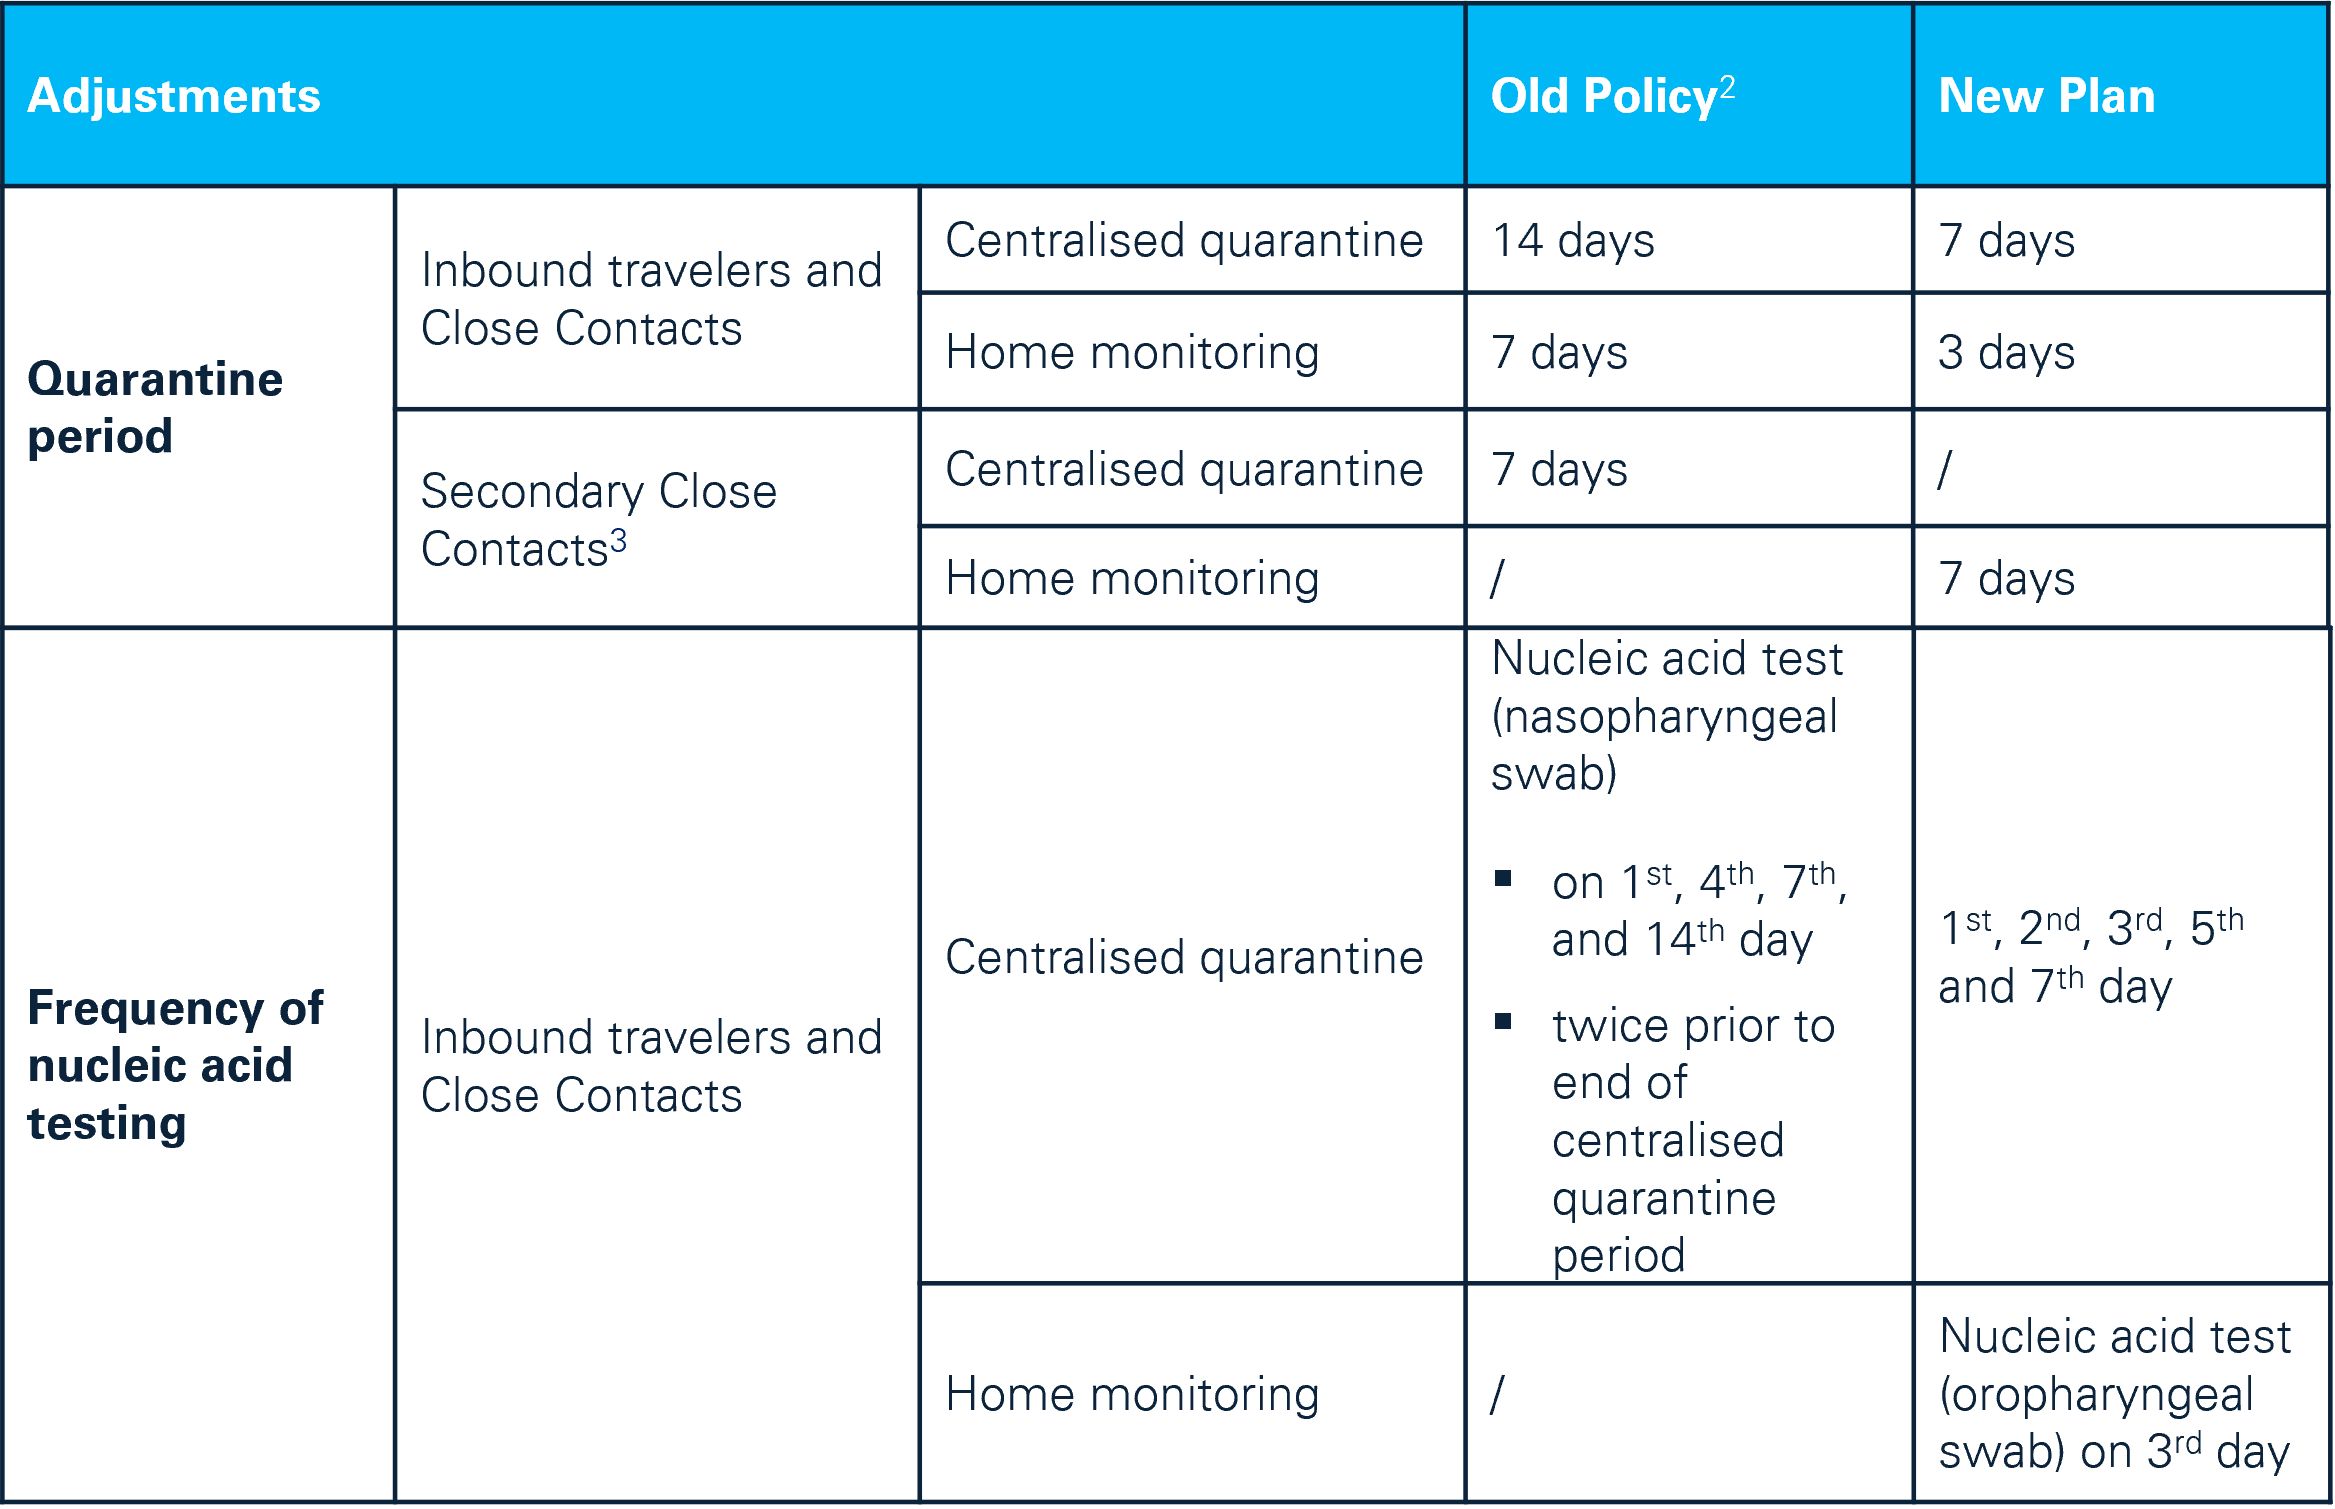 Shortened quarantine period for inbound travelers and Close Contacts